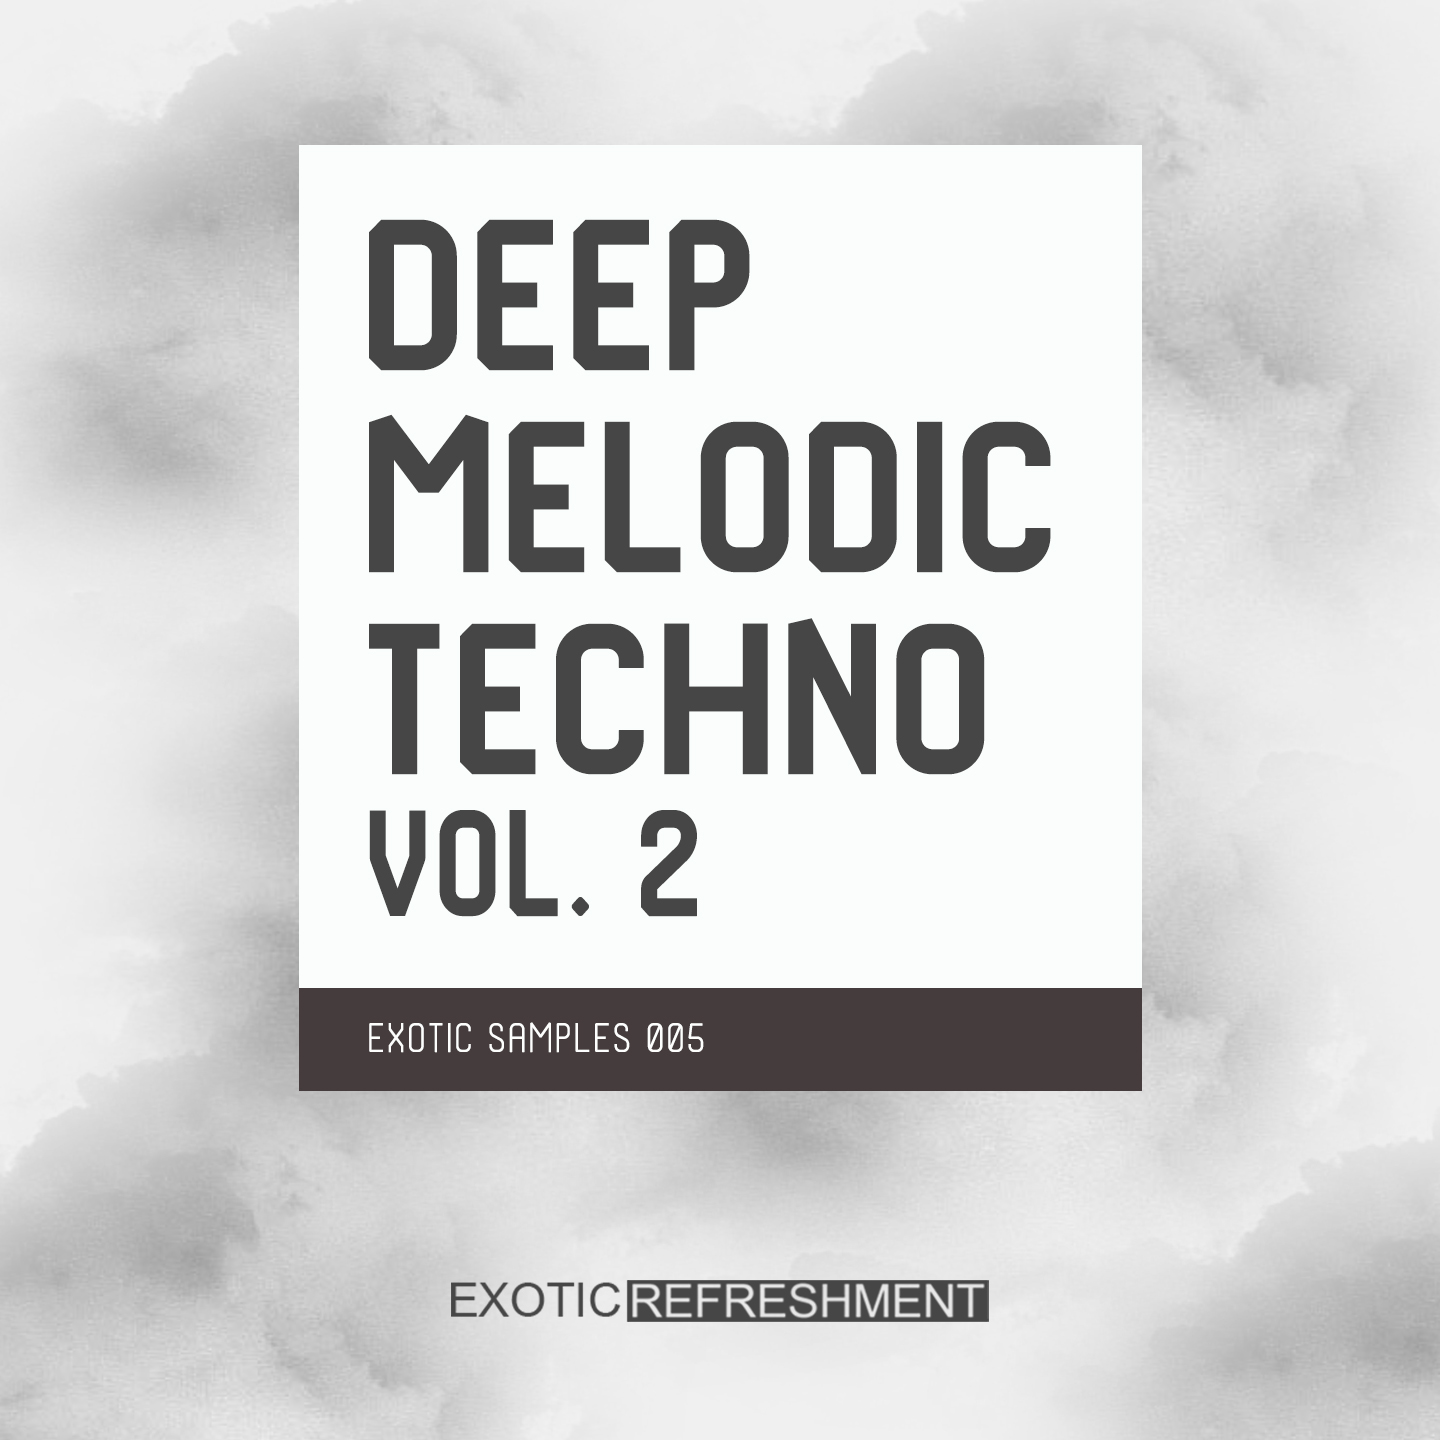 DEEP MELODIC TECHNO VOL. 2 - EXOTIC SAMPLES 005 - SAMPLE PACK